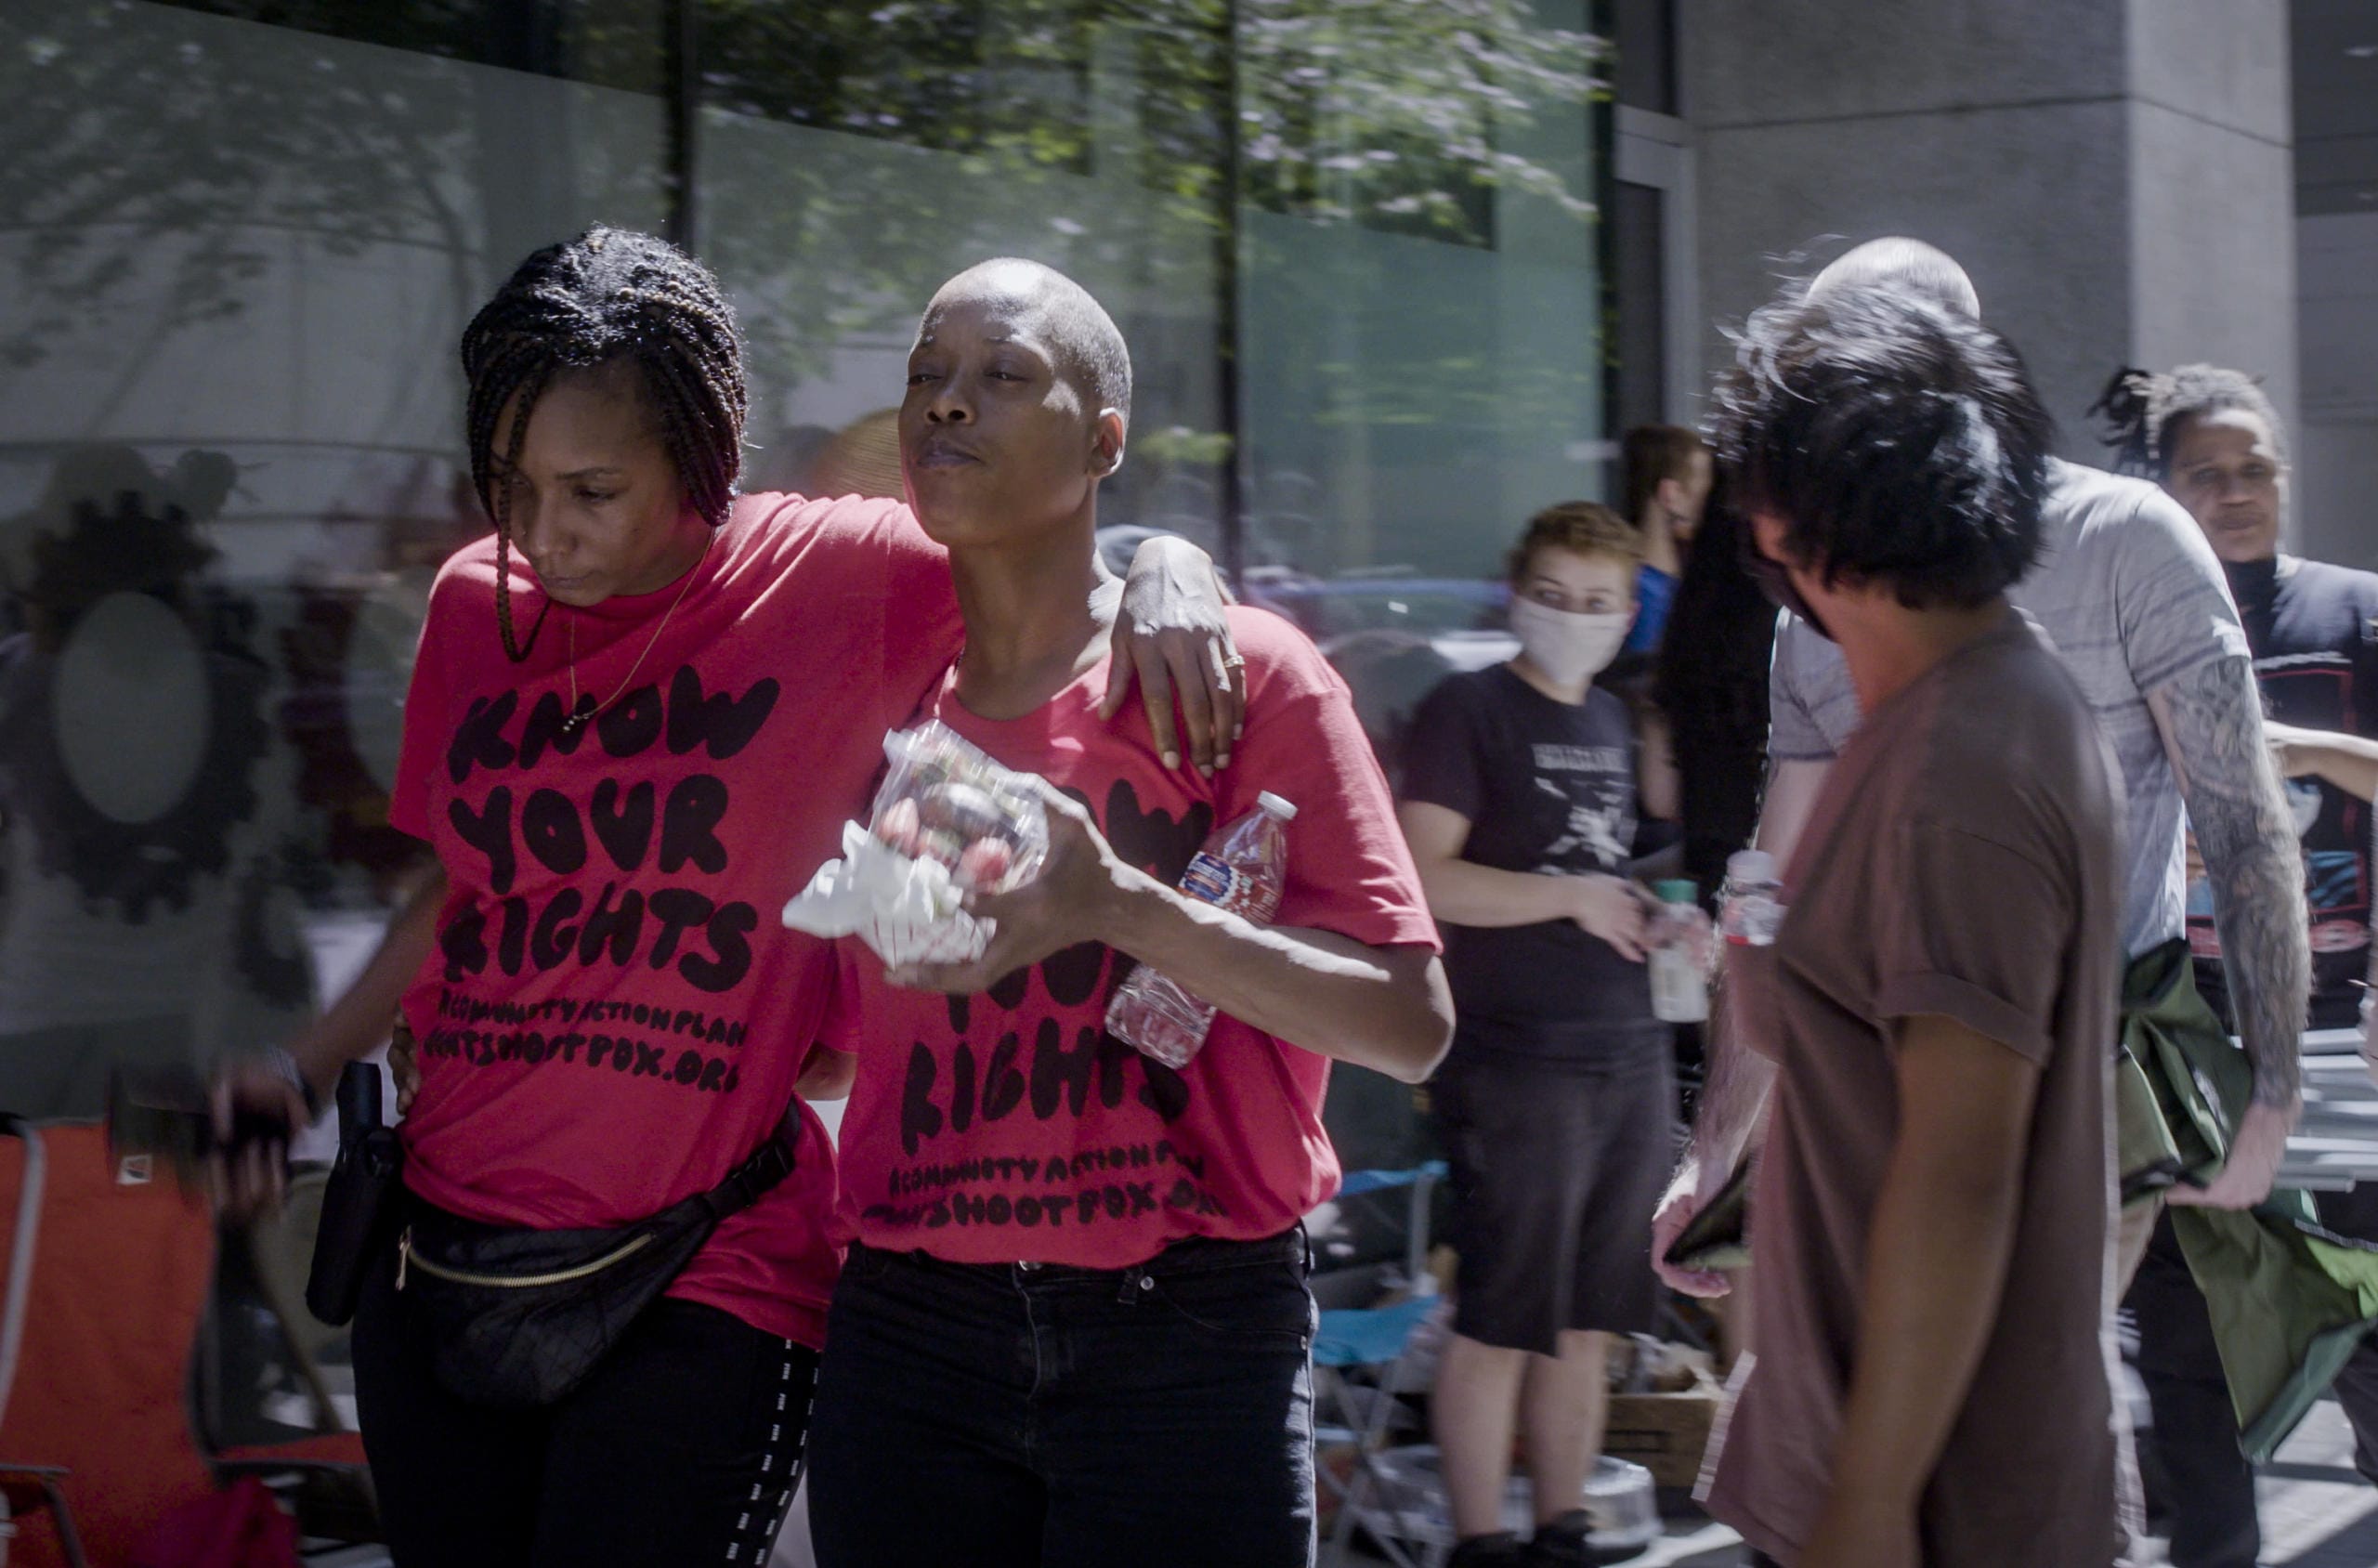 Demetria Hester, second from left,leaves the Multnomah County Justice Center on Monday, Aug. 10, 2020, in Portland, Ore. Hester became a leading activist in the racial justice movement after she was assaulted by a white supremacist three years ago. Authorities said Hester won't be charged following her arrest early Monday. Hester had been booked on suspicion of disorderly conduct and interfering with a police officer during the protest that began Sunday night. Hester’s arrest drew a sharp rebuke from national Black Lives Matter activists, who are increasingly focusing on demonstrations in Oregon’s largest city.